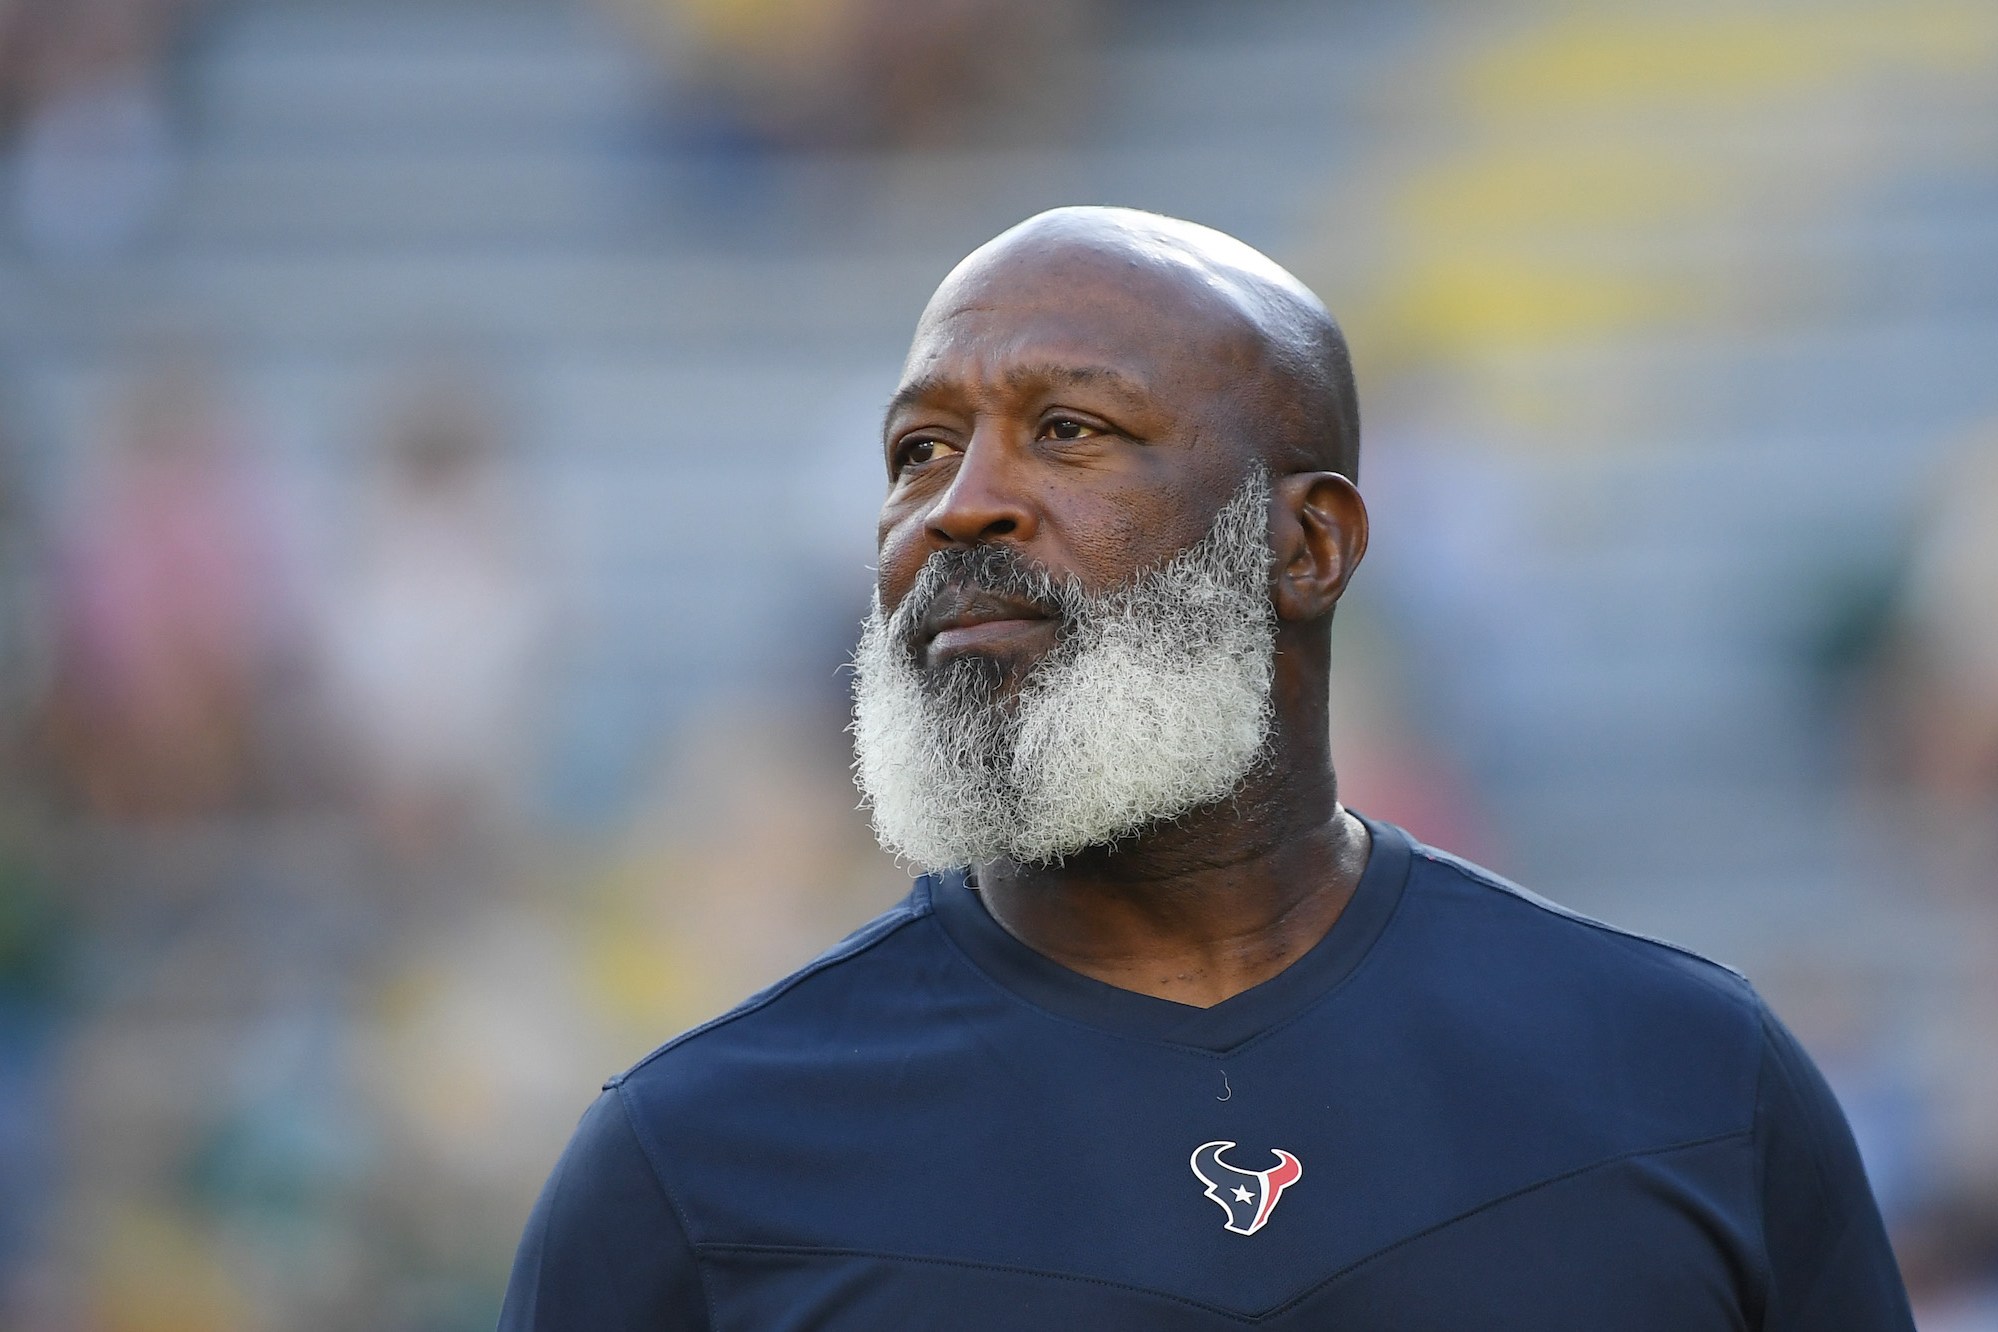 GREEN BAY, WISCONSIN - AUGUST 14: Lovie Smith of the Houston Texans looks on before the preseason game against the Green Bay Packers at Lambeau Field on August 14, 2021 in Green Bay, Wisconsin. (Photo by Quinn Harris/Getty Images)